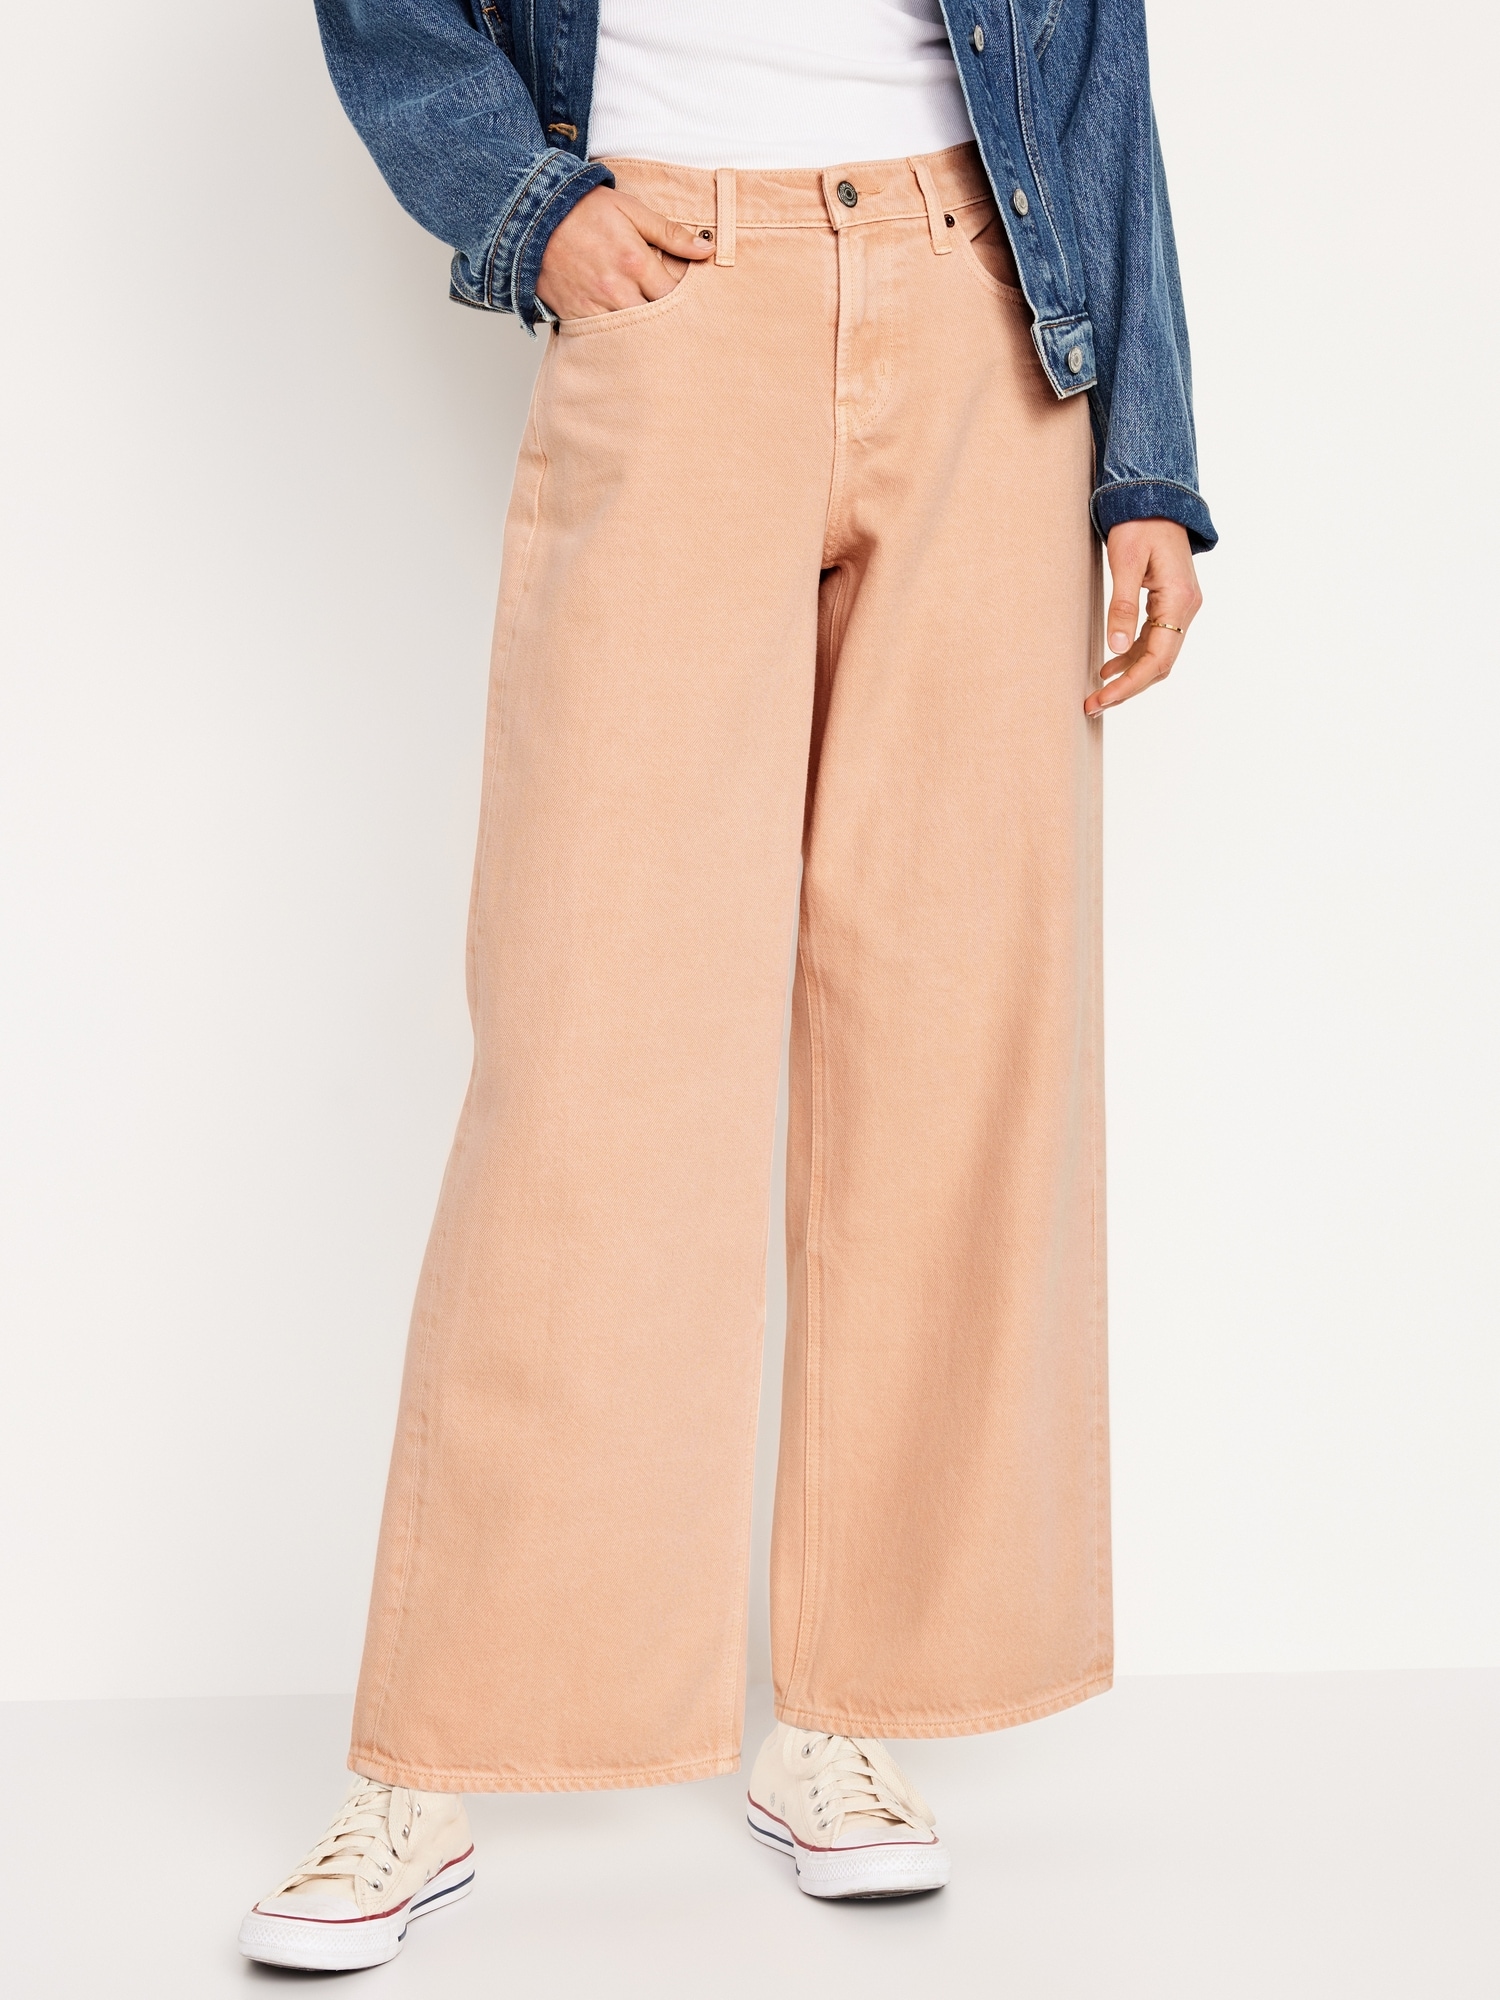 Baggy Wide Leg Jeans, Aesthetic High Waisted Jeans